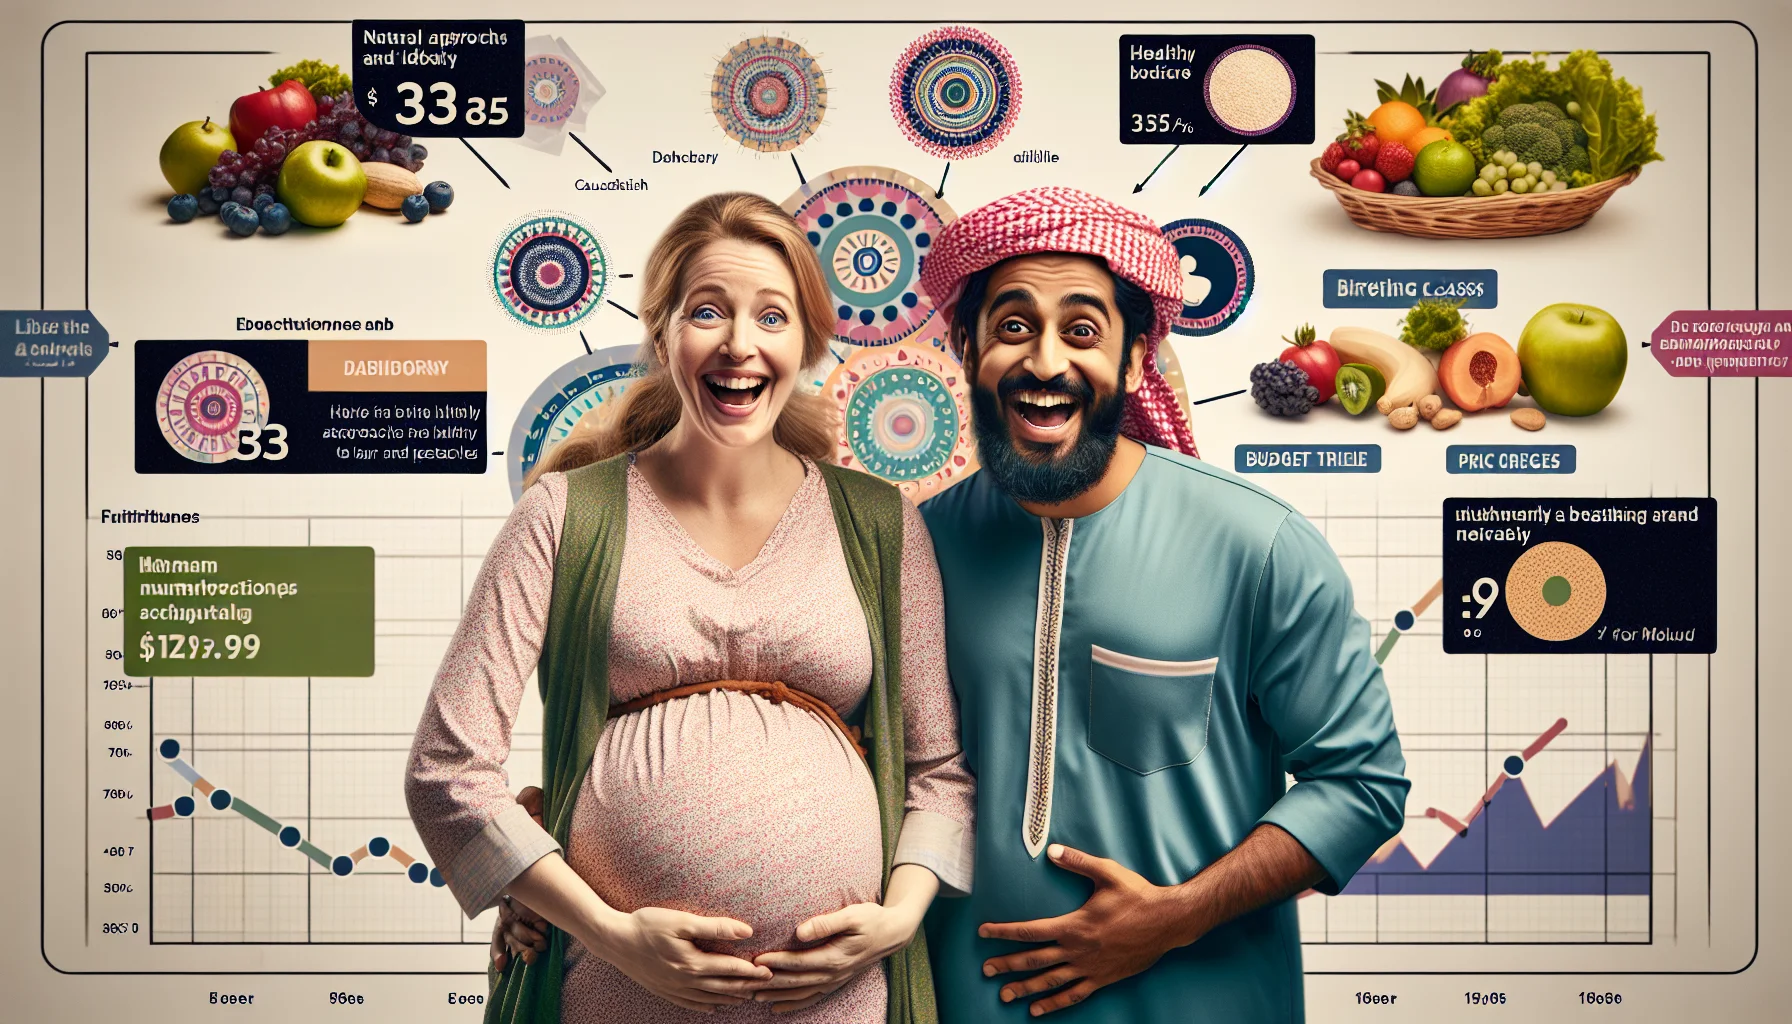 Generate an amusing and realistic image showcasing natural approaches to labor and delivery. This image should feature an expectant Caucasian mother and a Middle Eastern father, both in a birthing class practicing breathing techniques, with happy and humorous expressions. Incorporate visual elements that provide educational info about healthy and budget-friendly eating strategies for expectant parents, such as a chart illustrating the amount of nutrients in various fruits and vegetables, alongside price tags. Let the overall ambience of the image be playful and informative, aimed at promoting a healthier lifestyle.